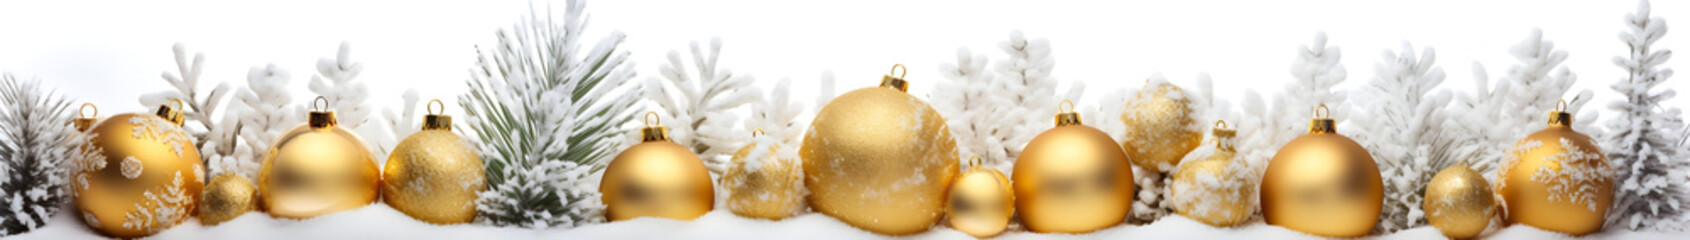 Golden Christmas balls, stars, pine cones and spruce branches in a row covered with snow on white background in winter. Horizontal composition.